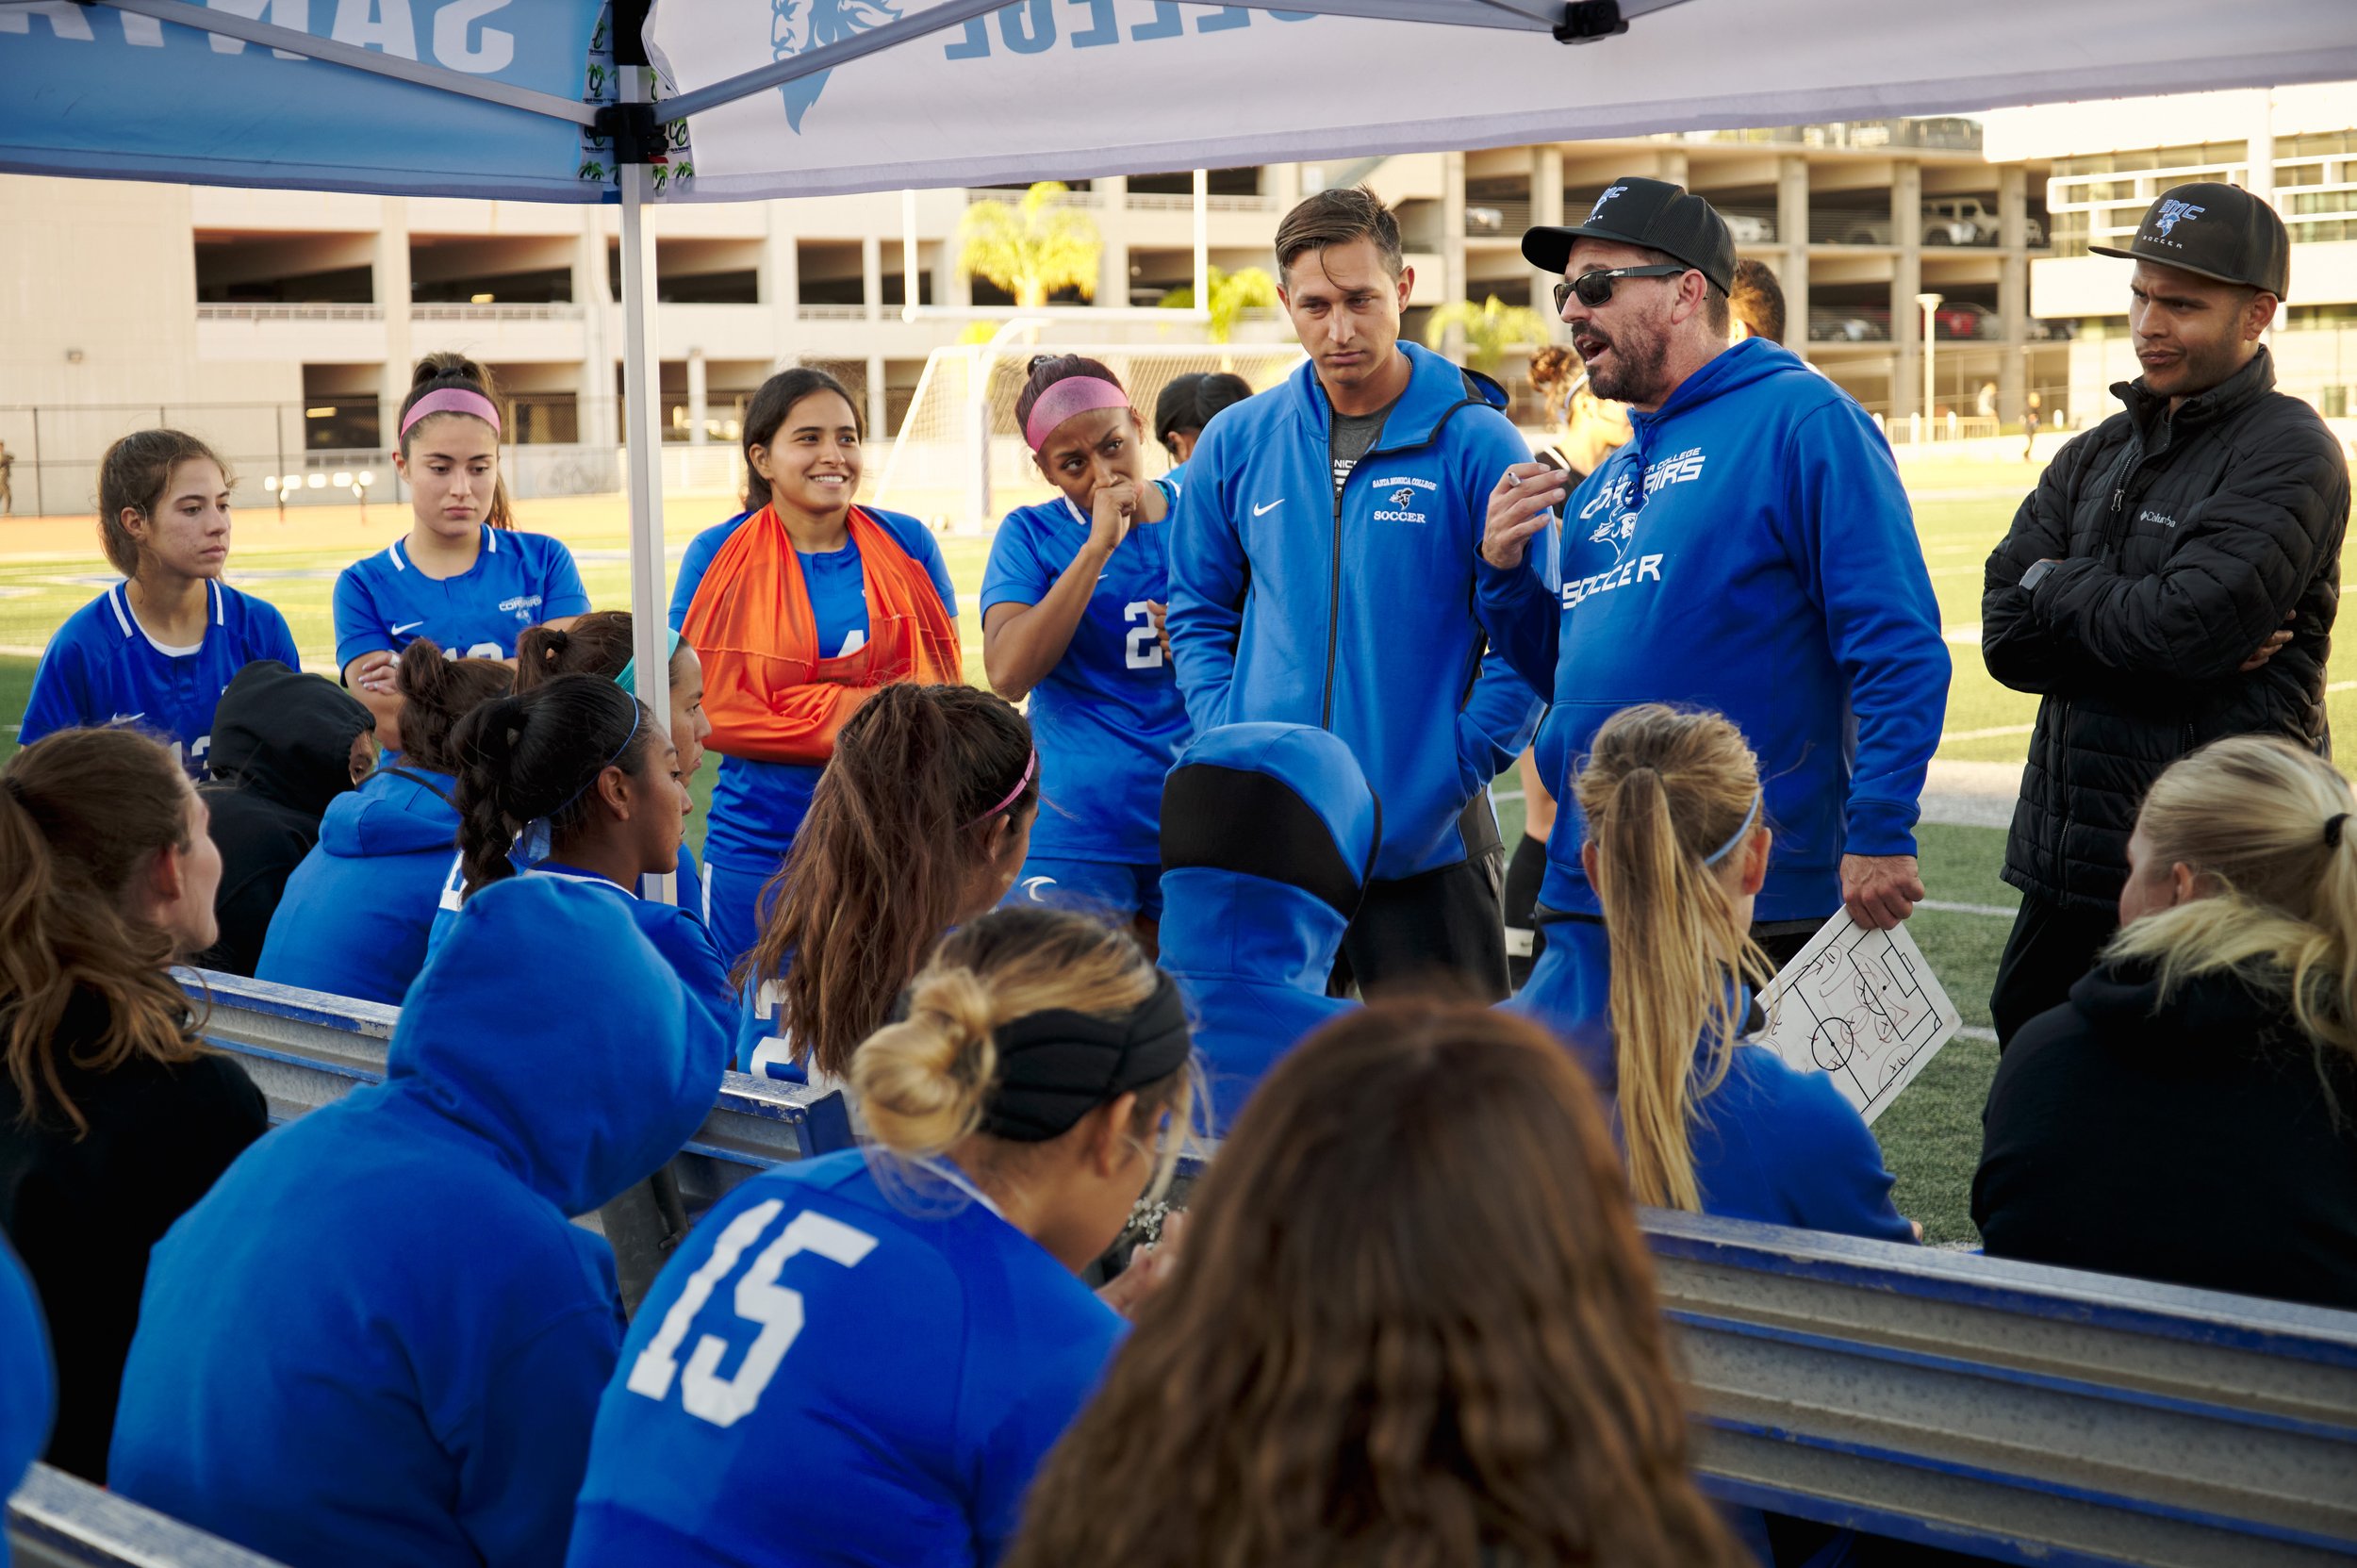  Santa Monica College Corsairs Women's Soccer Head Coach Aaron Benditson (sunglasses) talks to the team during the match against the College of the Canyons Cougars on Thursday, Nov. 10, 2022, at Corsair Field in Santa Monica, Calif. The Corsairs lost